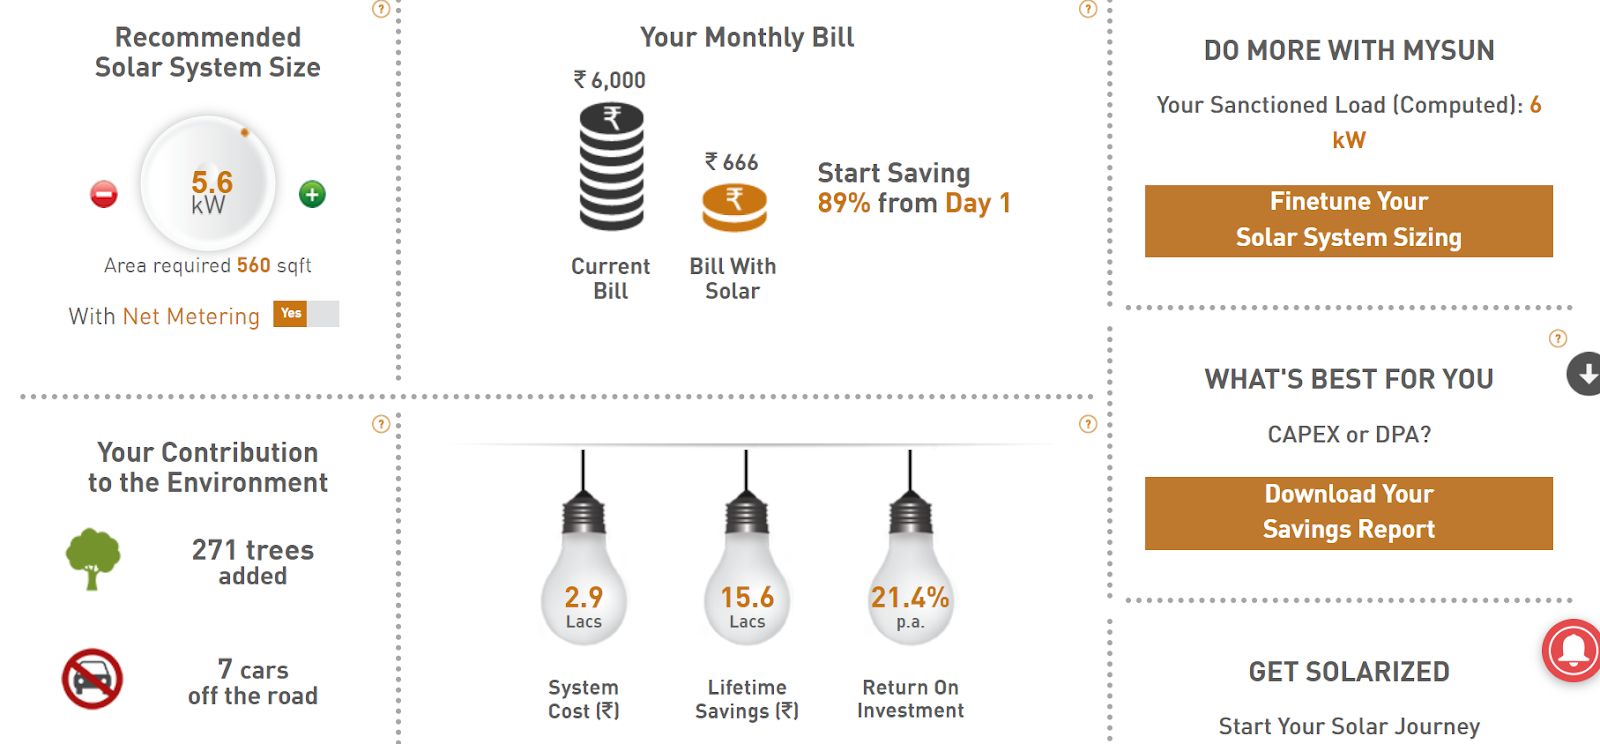 Why is MYSUN, the solar company, a perfect solar partner to help residents of Bareilly save lakhs on their power bills